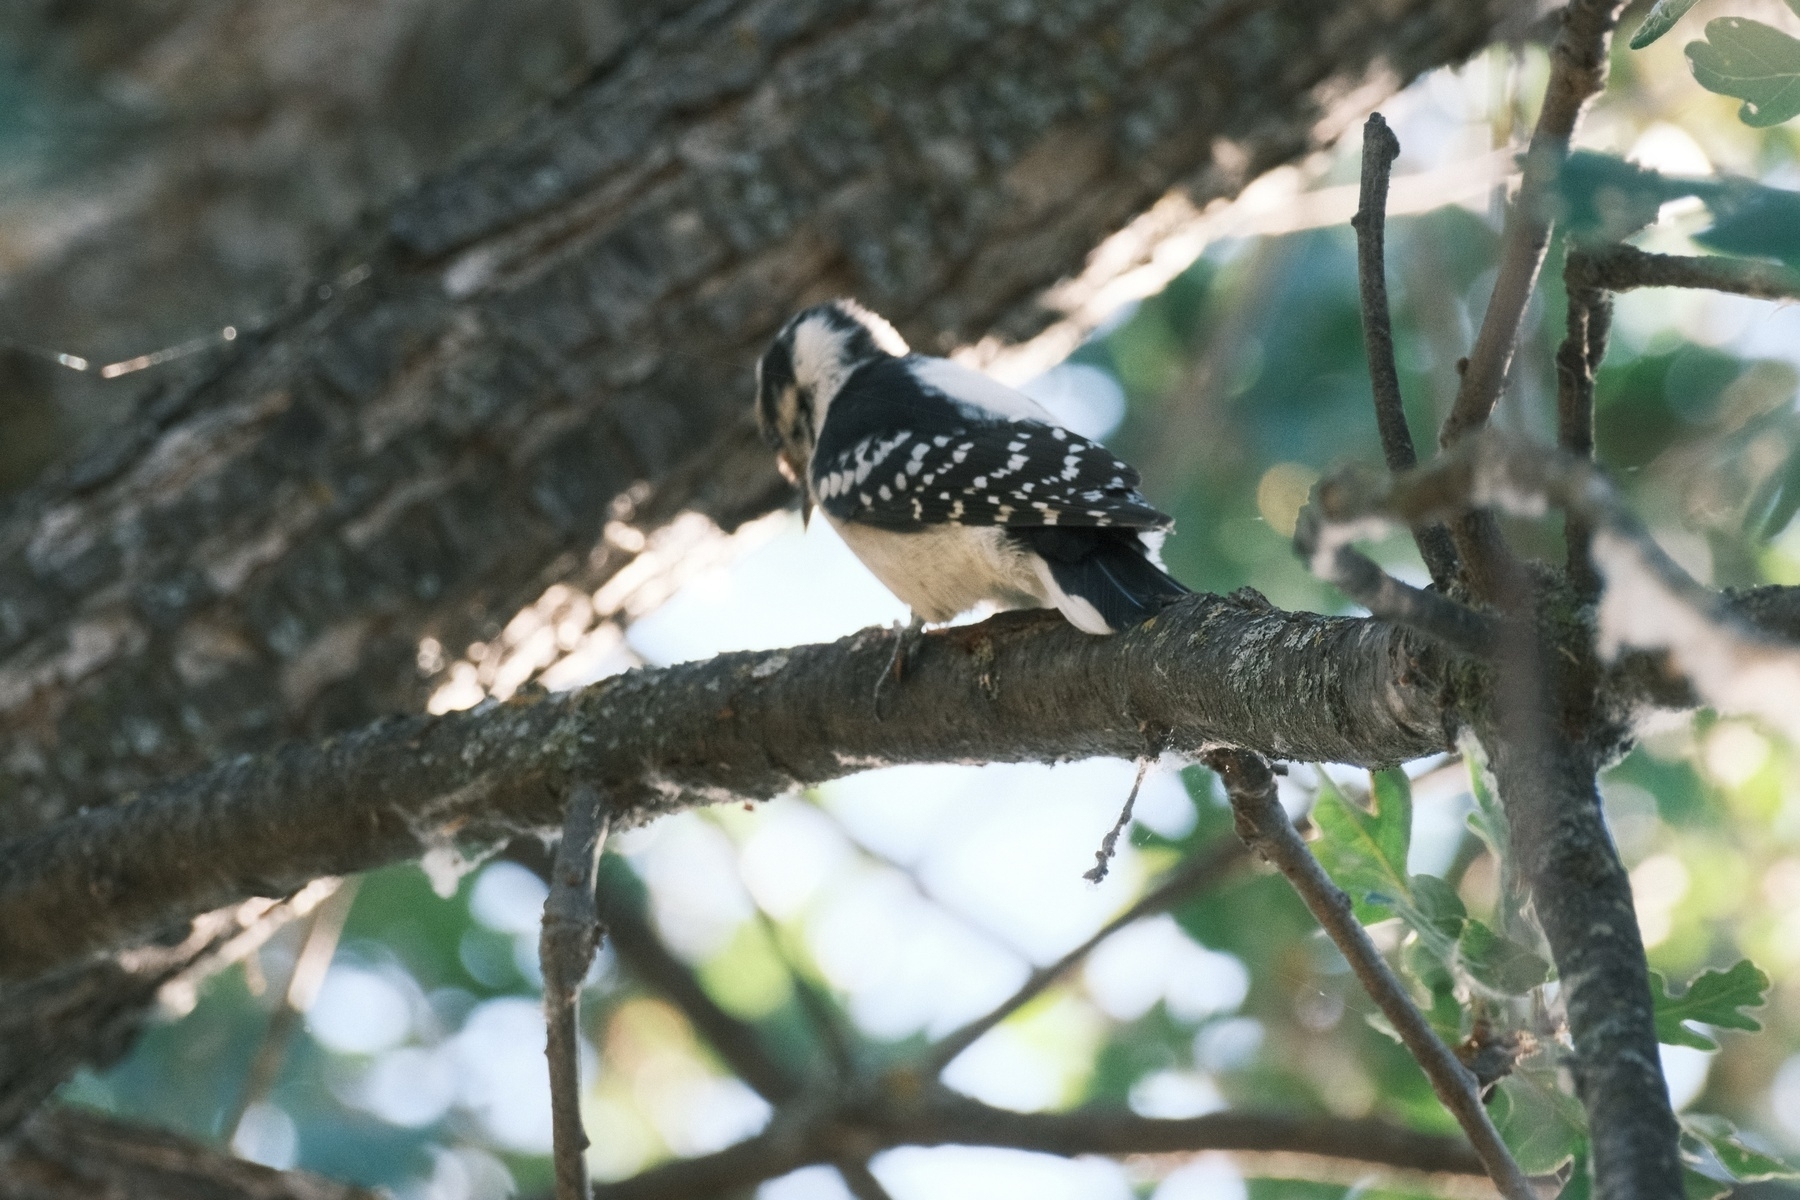 A Downy Woodpecker on a tree branch with a slightly motion blurred head. It was pecking at the time. The woodpecker has a white belly and black wings with rows of white spots. Its head has some white with a black stripe up the middle and over its eyes.